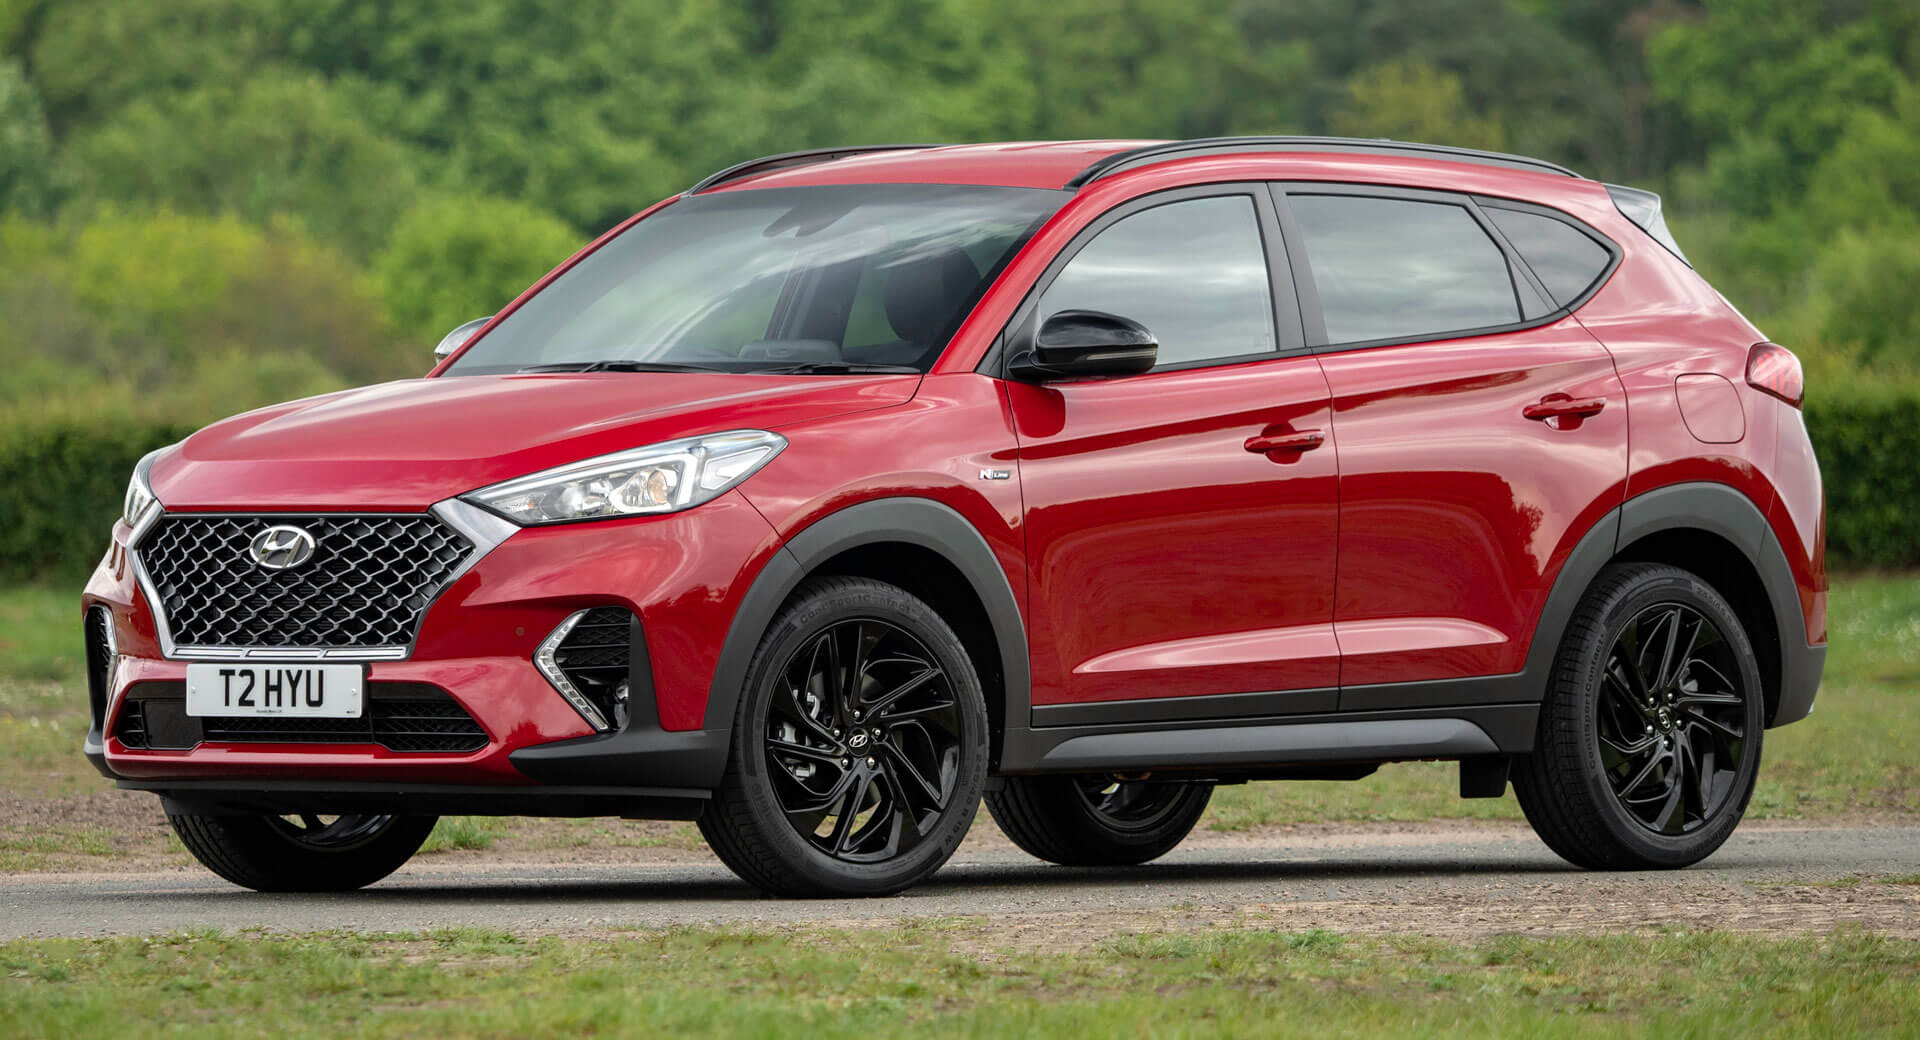 Hyundai Tucson N Line Priced From £25,995 In UK Carscoops